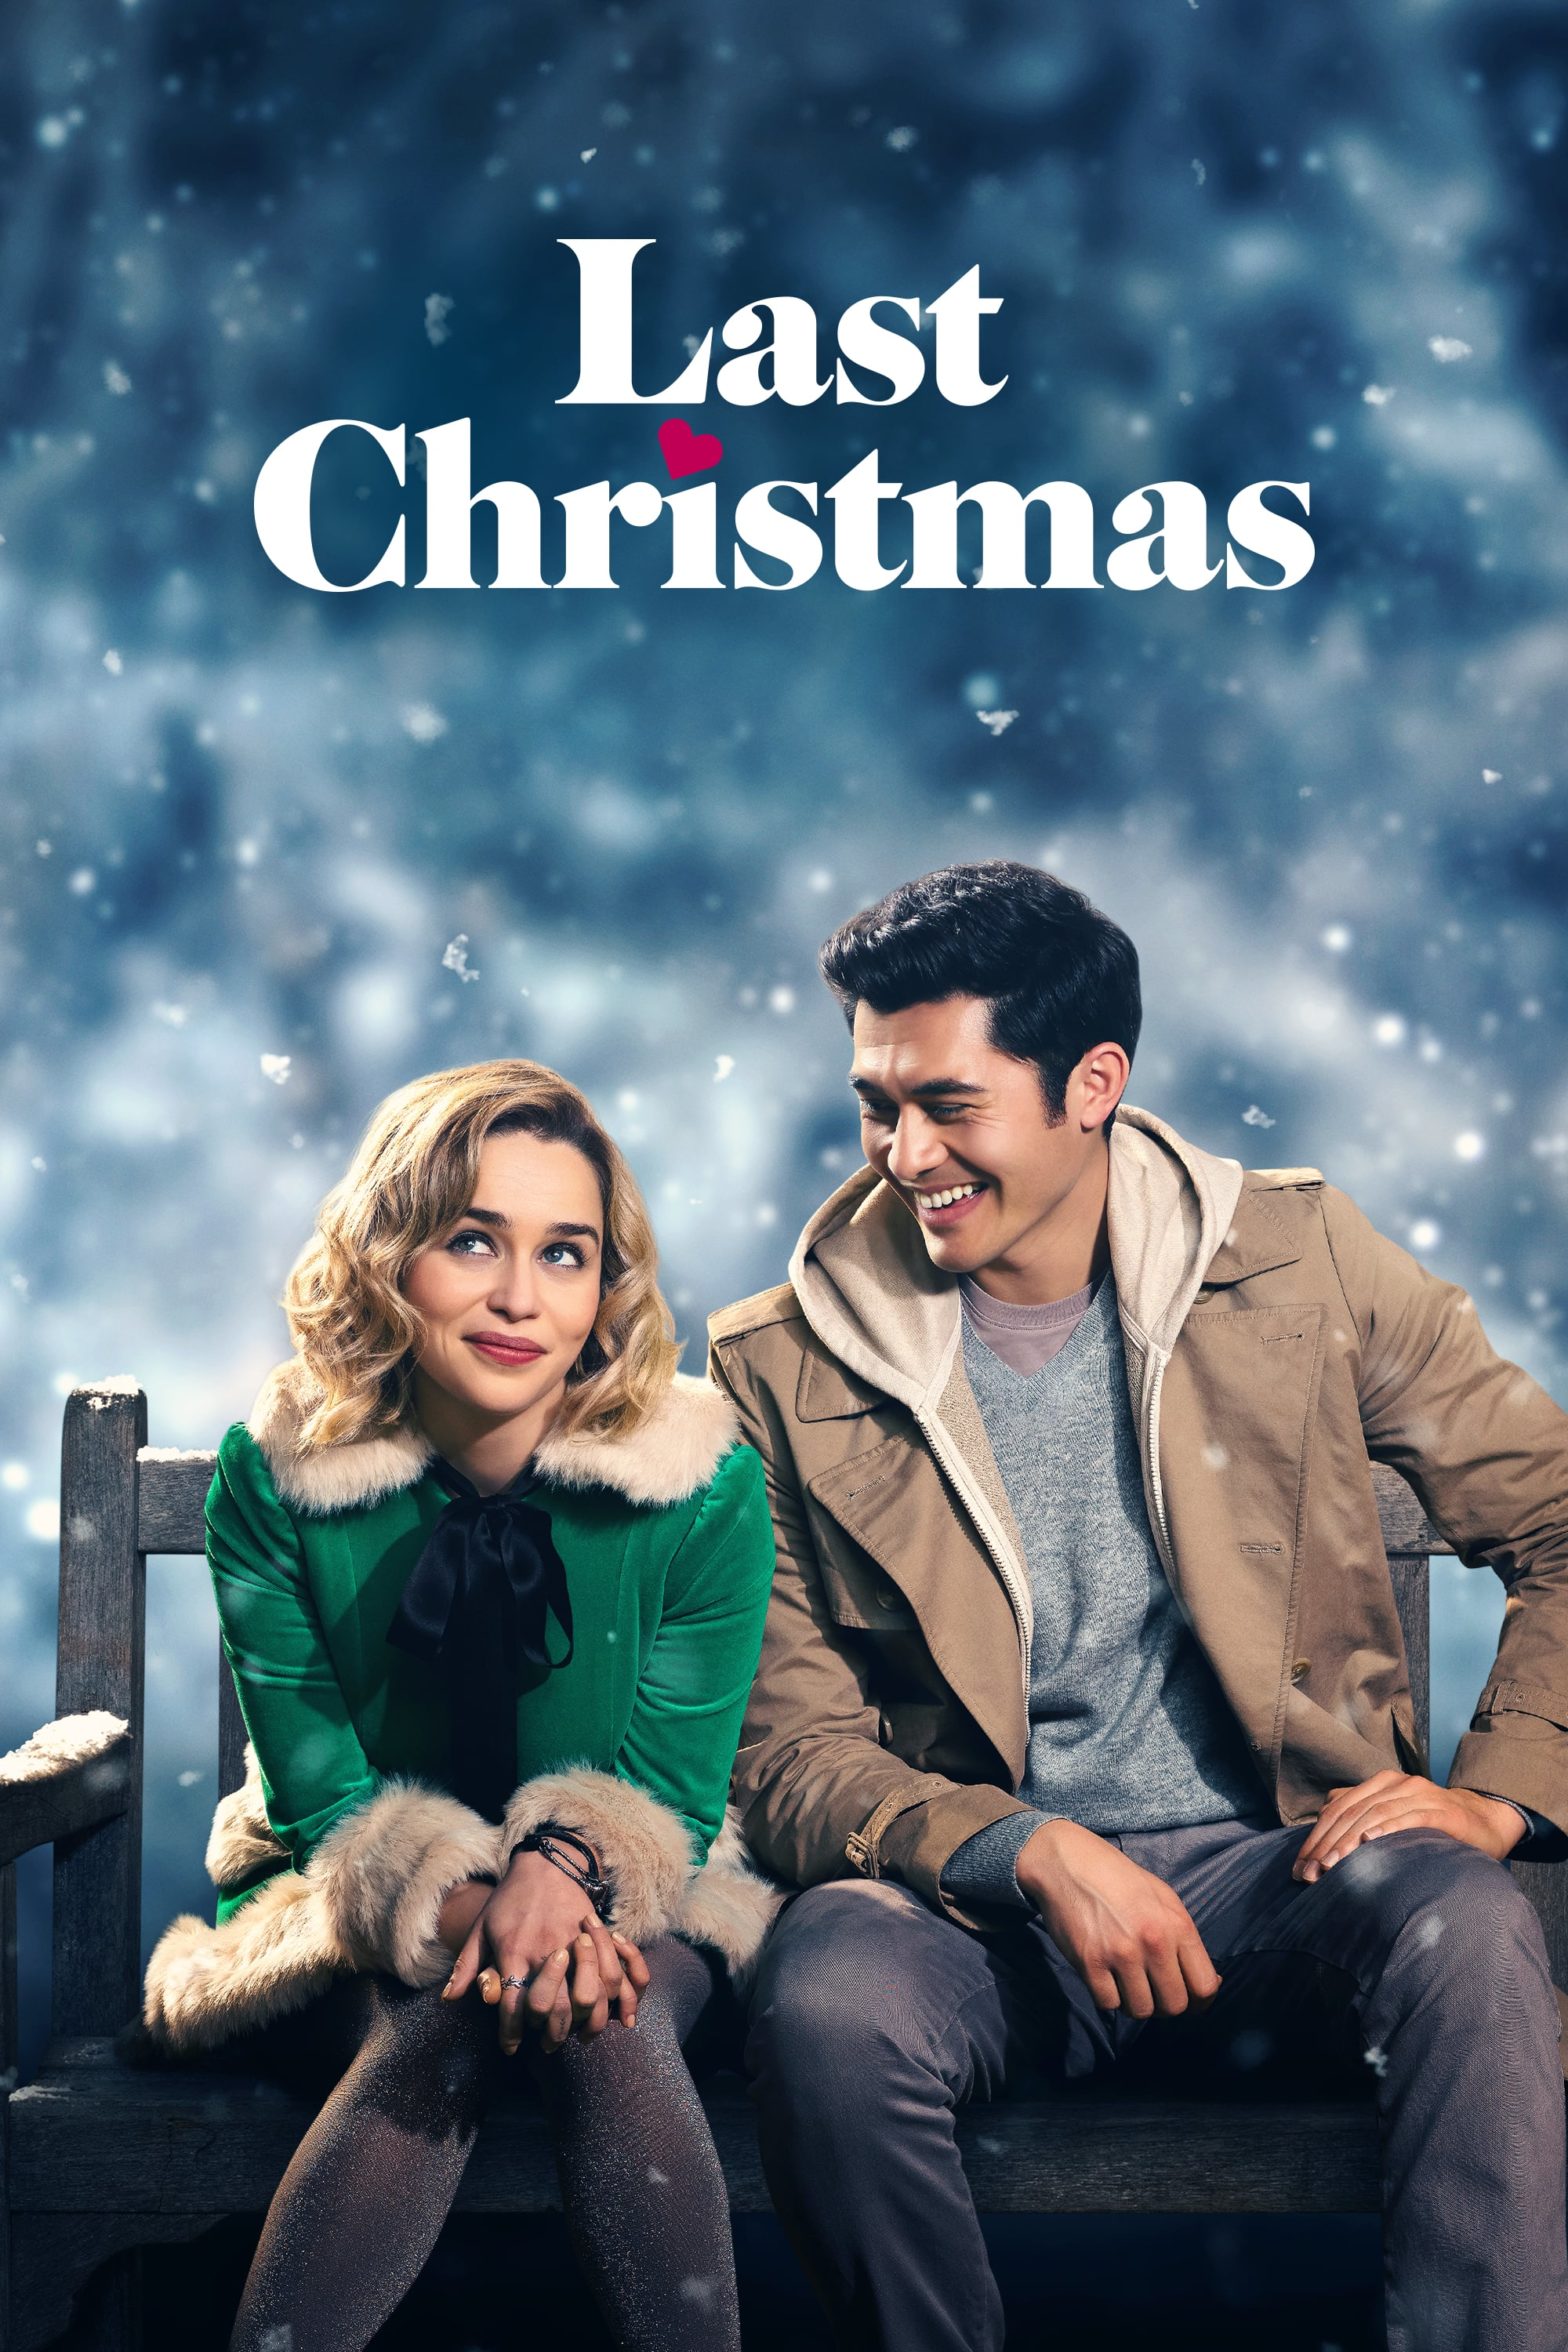 Poster for the movie "Last Christmas"